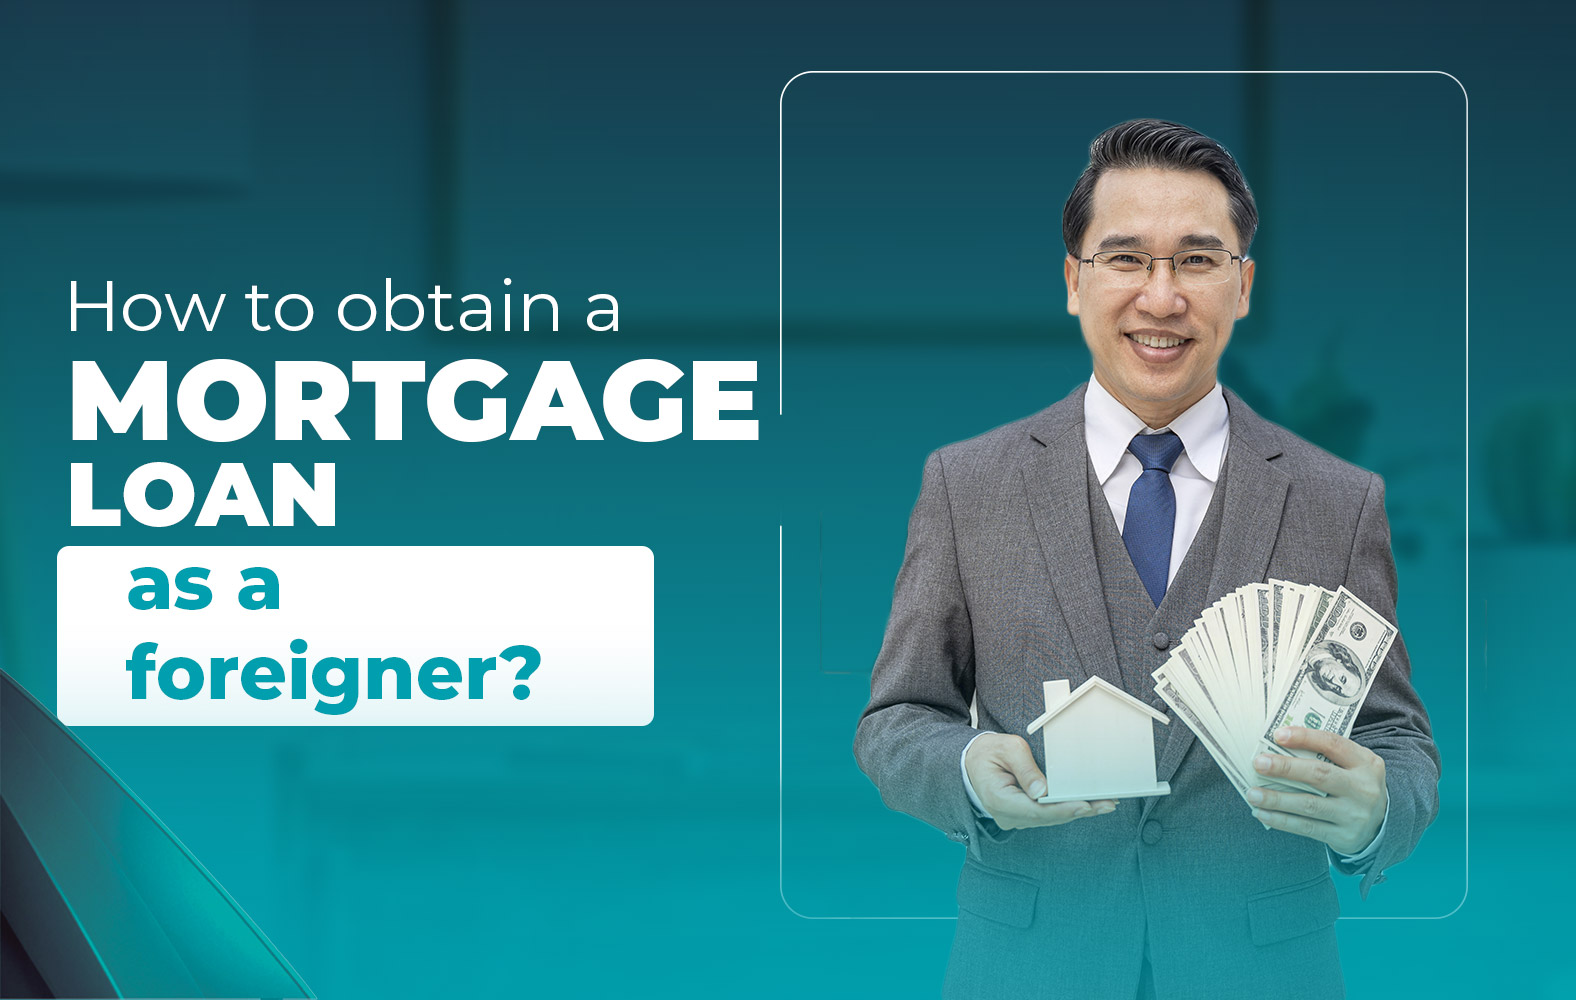 How to obtain a mortgage loan as a foreigner?